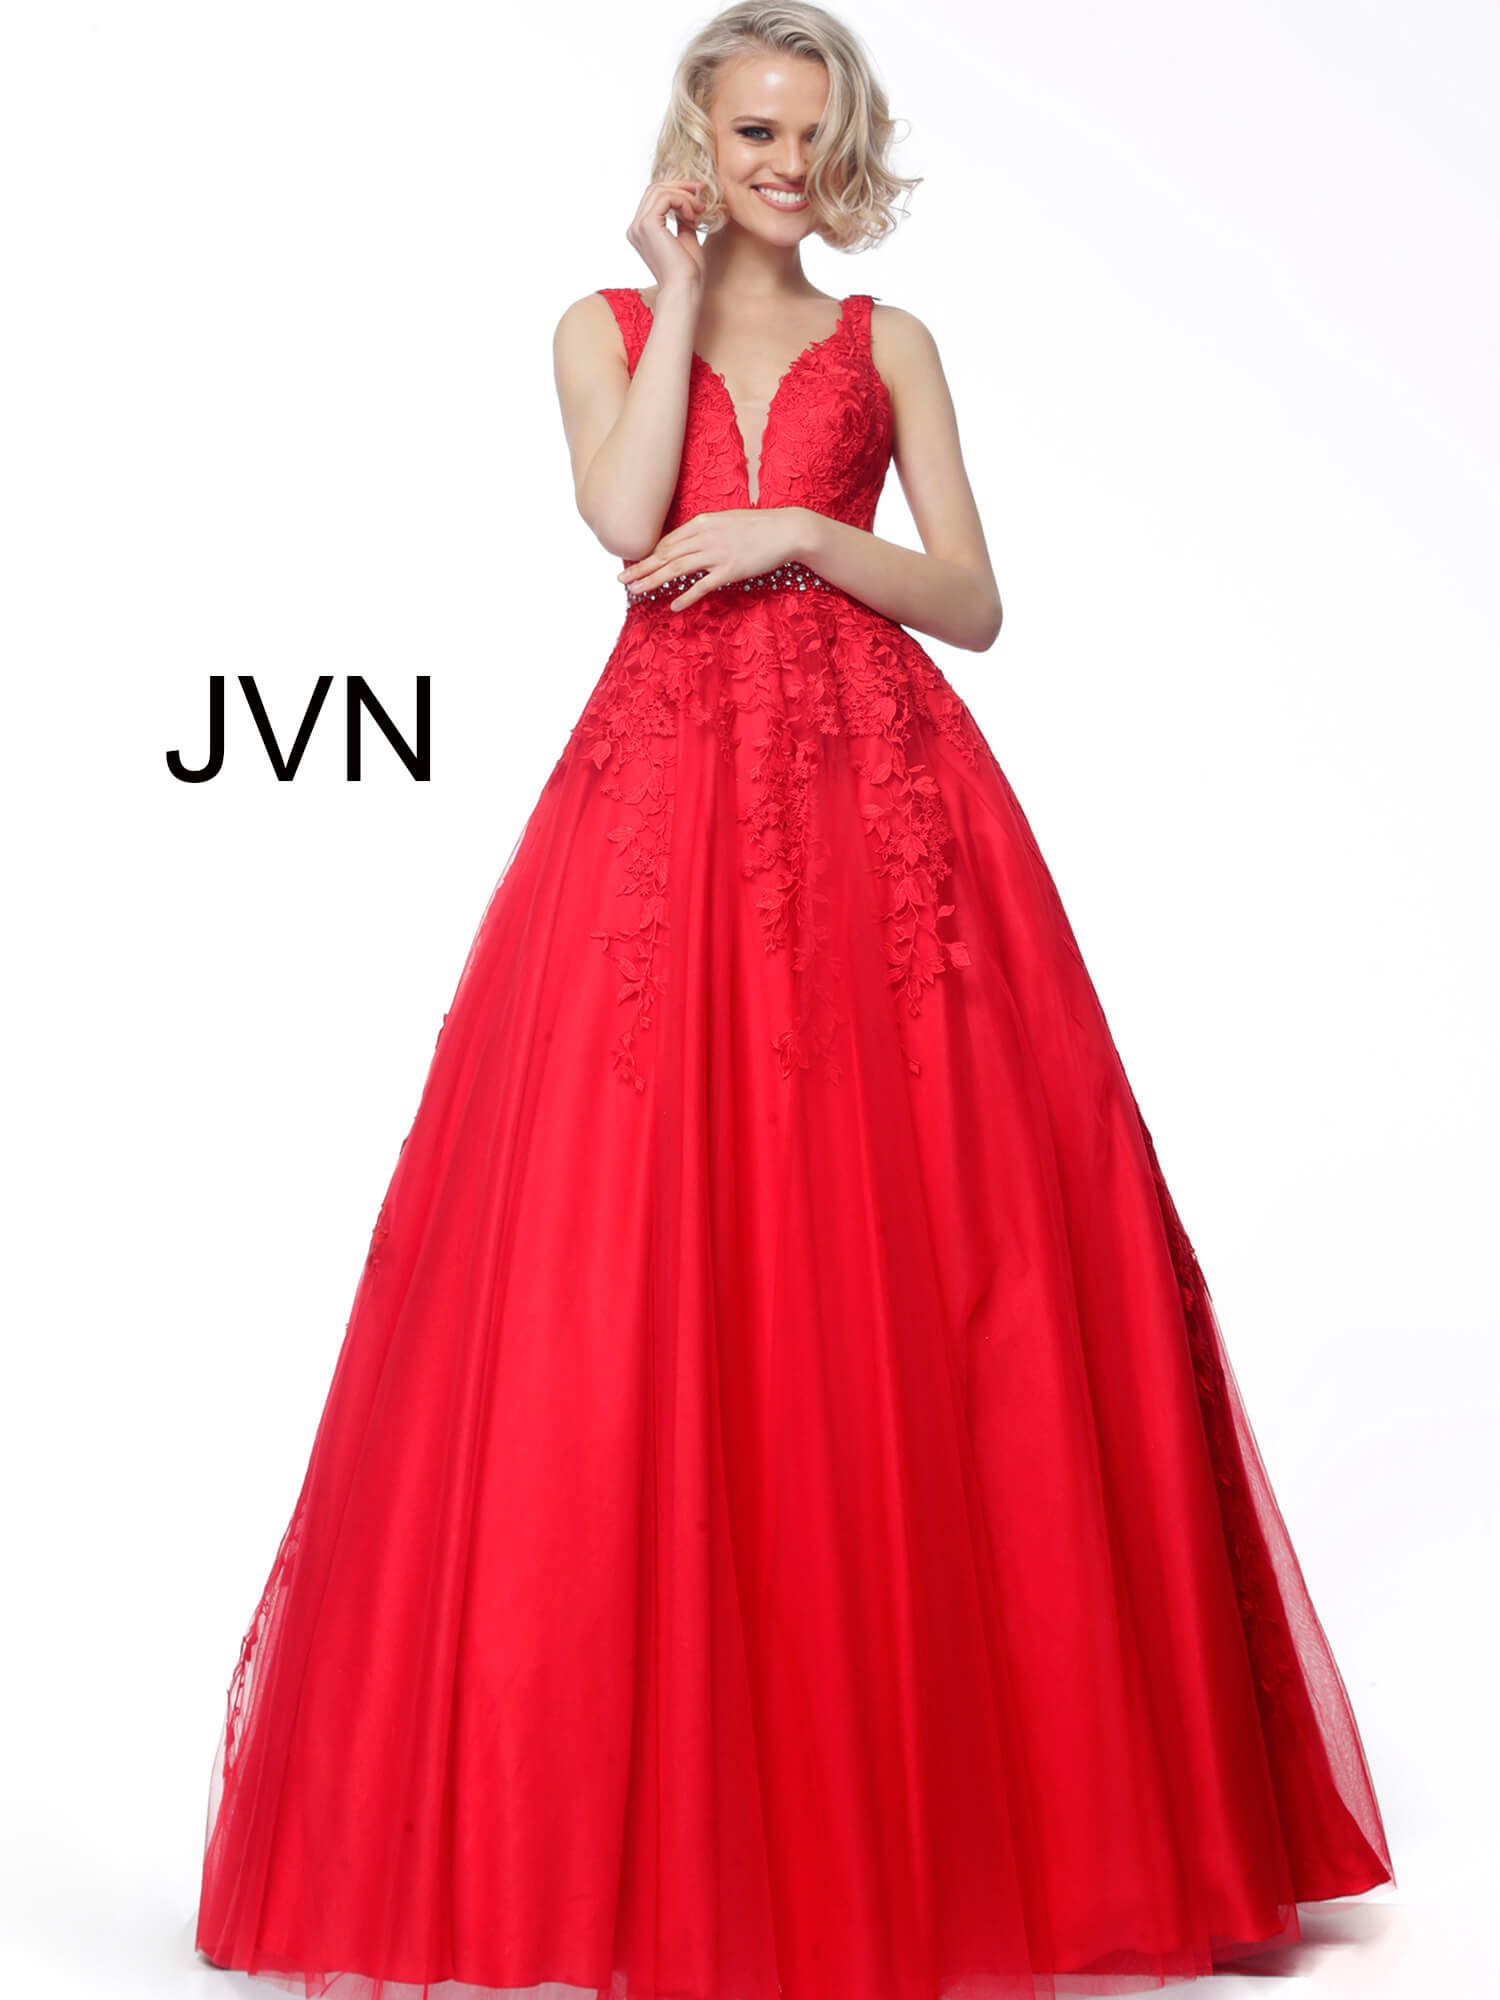 JVN68258 Dress | Red long beaded belt floral lace sleeveless prom ballgown